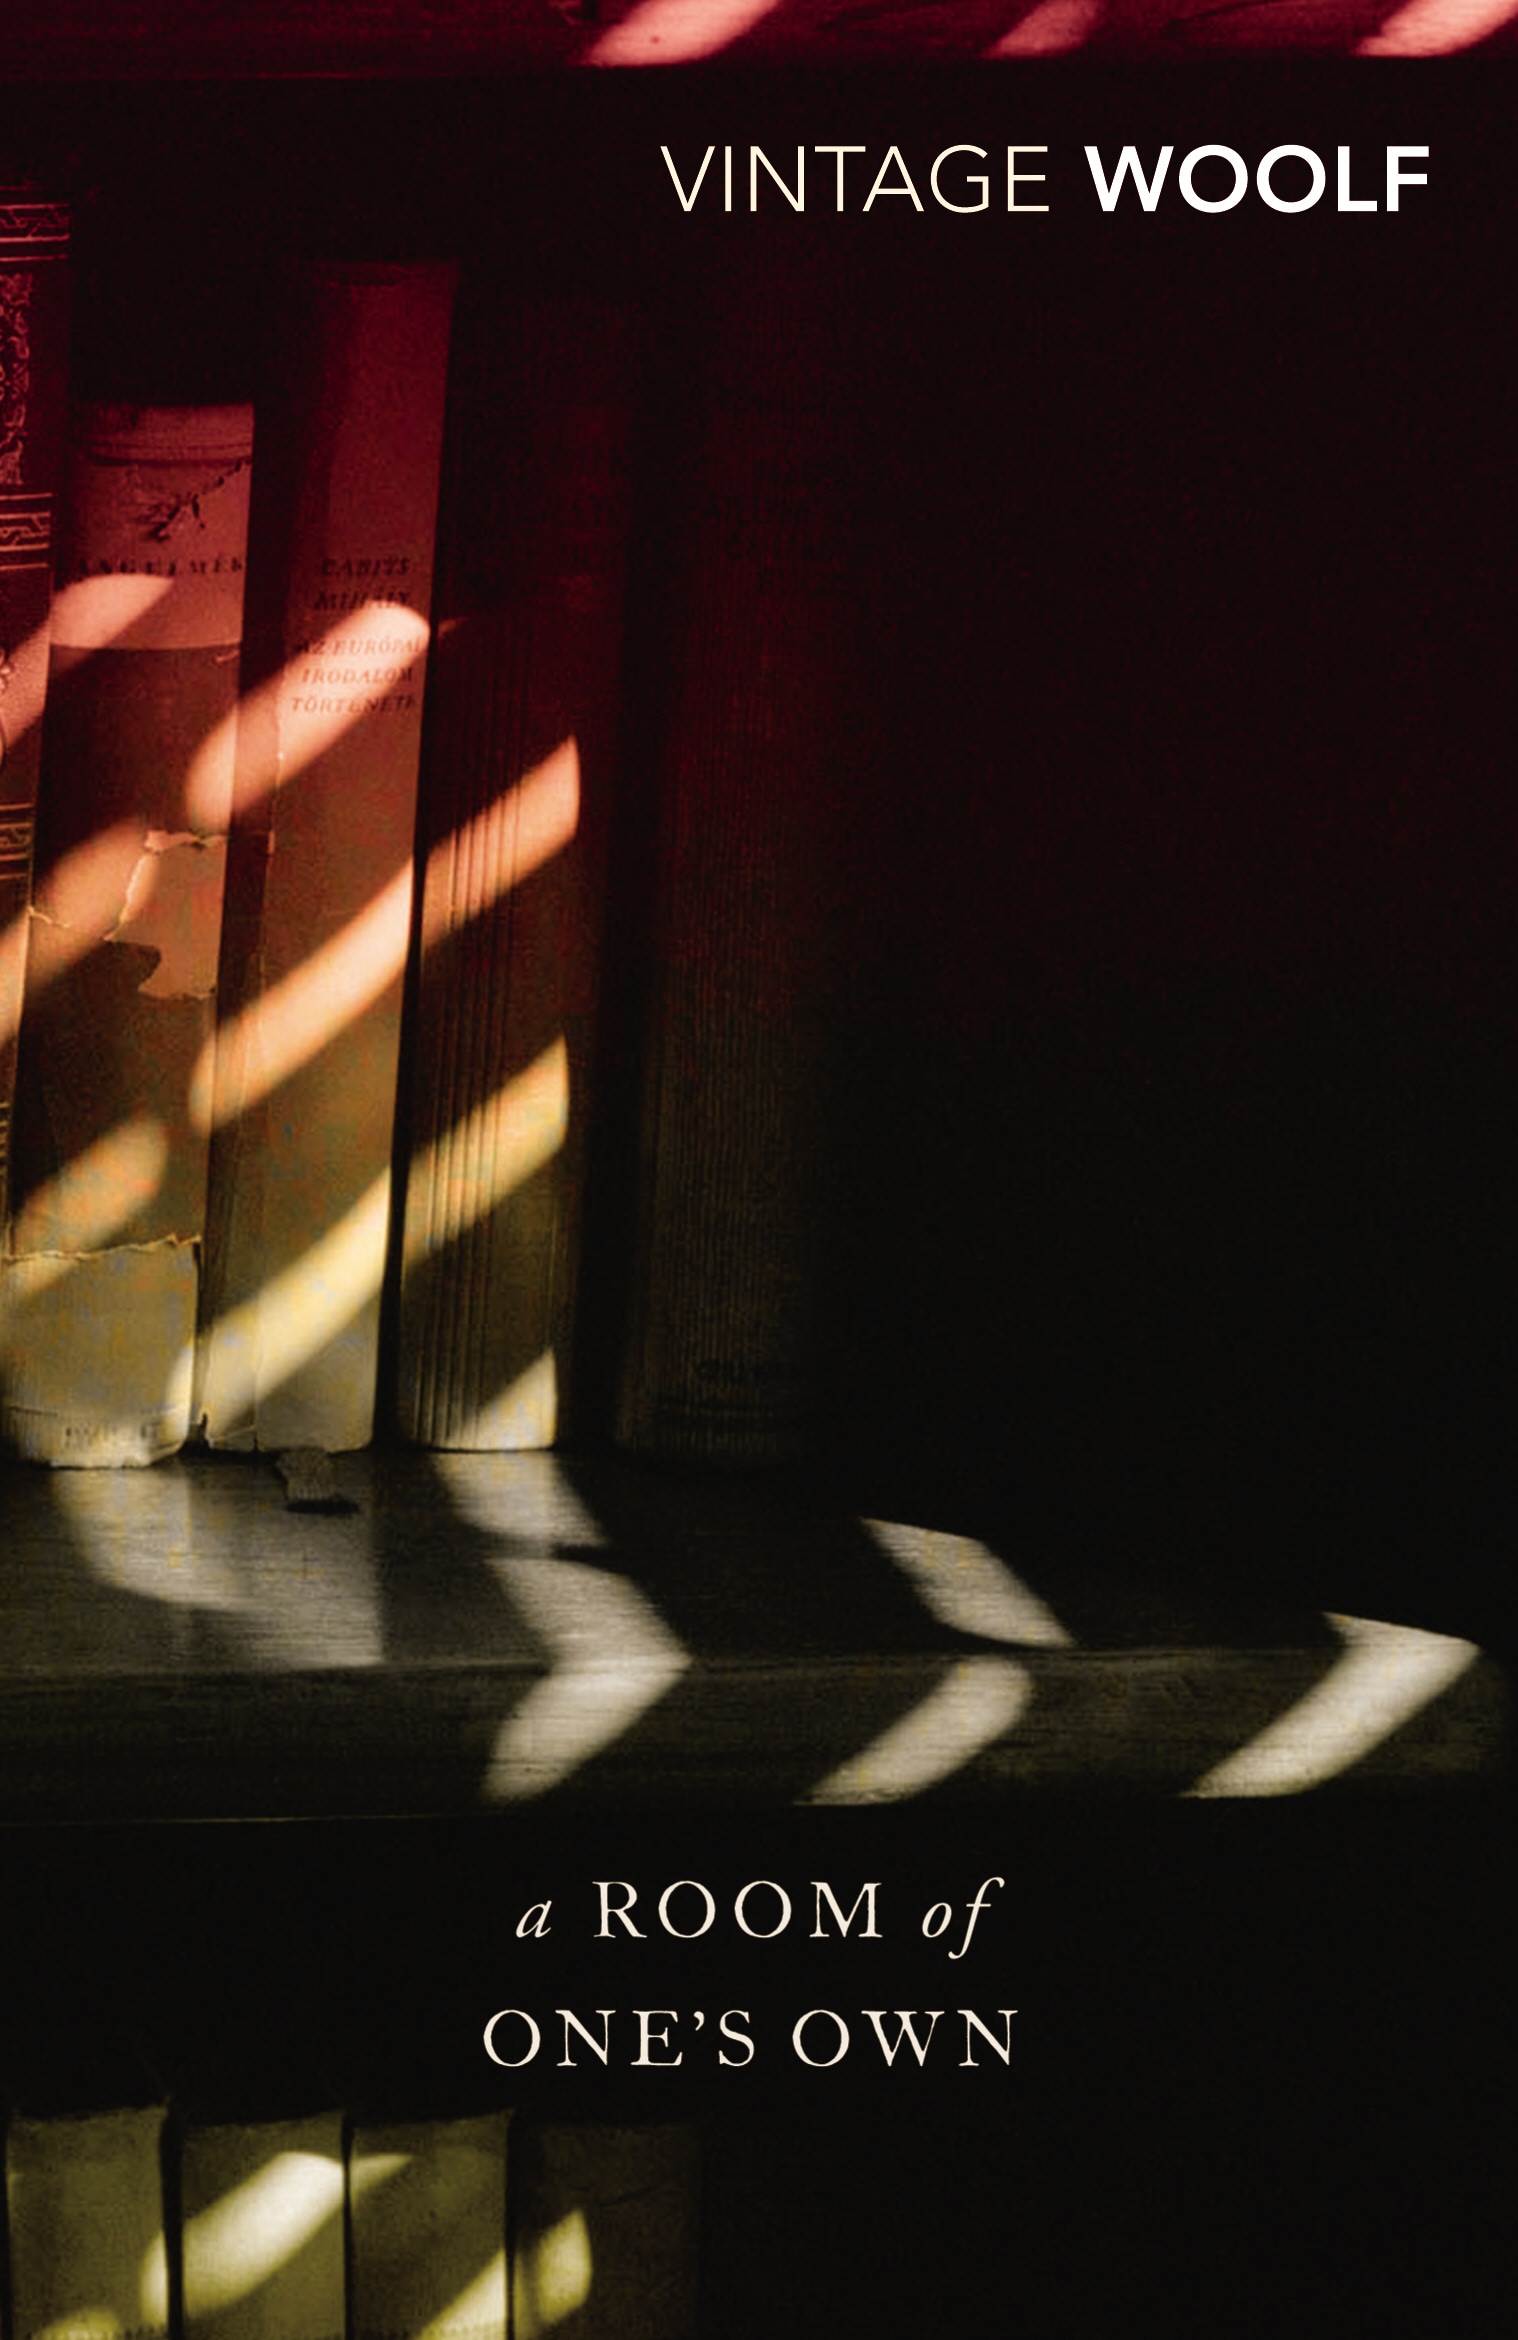 Book “A Room of One's Own and Three Guineas” by Virginia Woolf, Hermione Lee — September 26, 1996